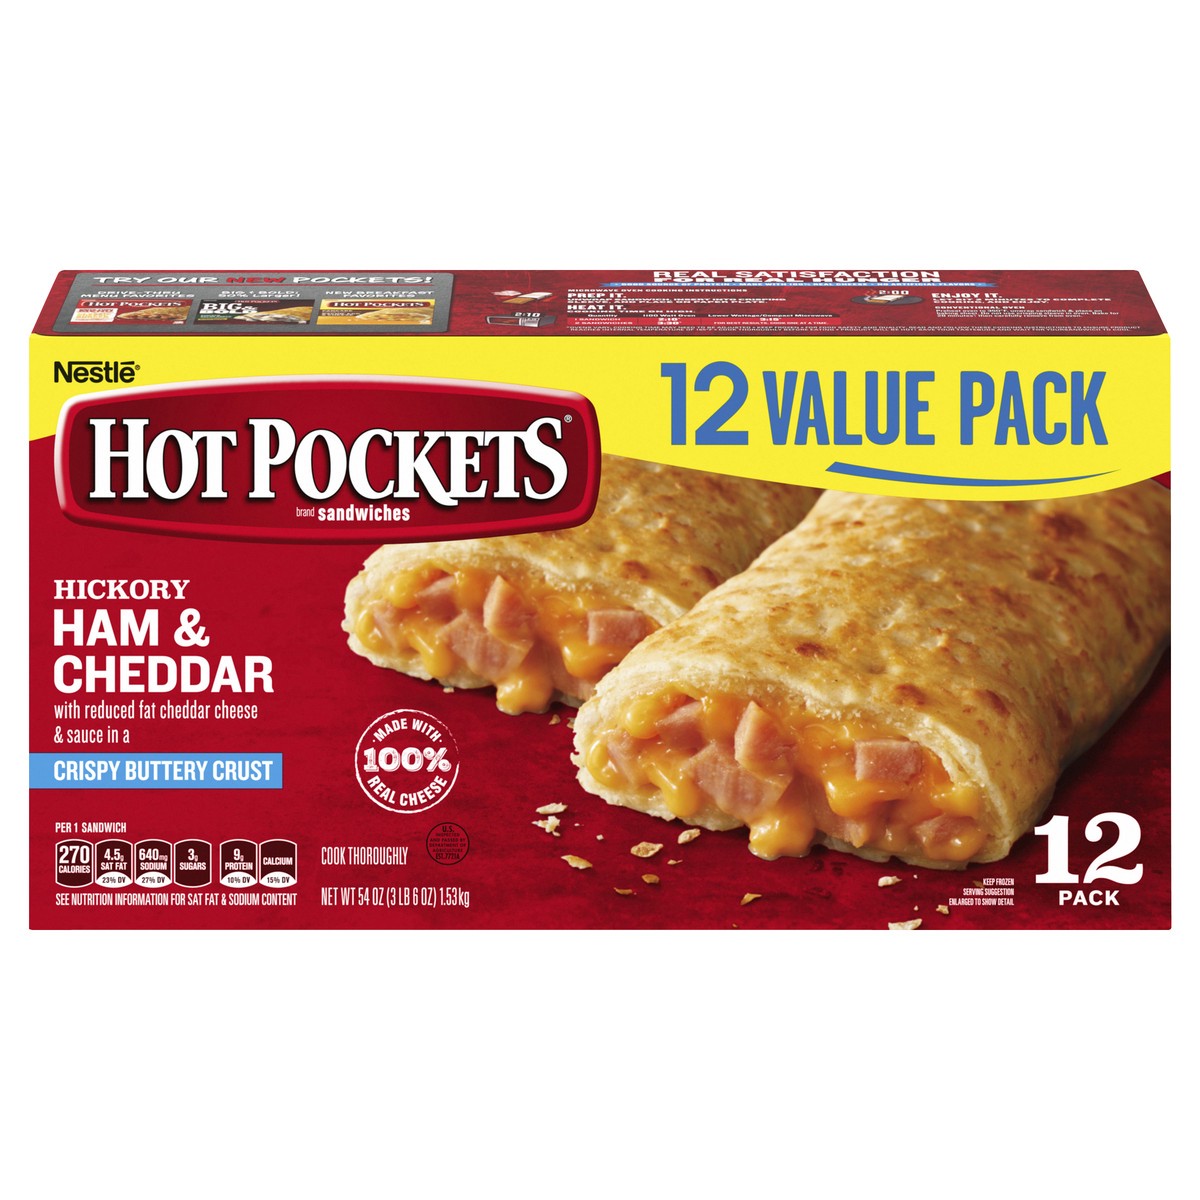 slide 1 of 8, Hot Pockets Hickory Ham & Cheddar Frozen Snacks in a Crispy Buttery Crust, Frozen Ham and Cheese Sandwiches, 12 Count, 12 ct